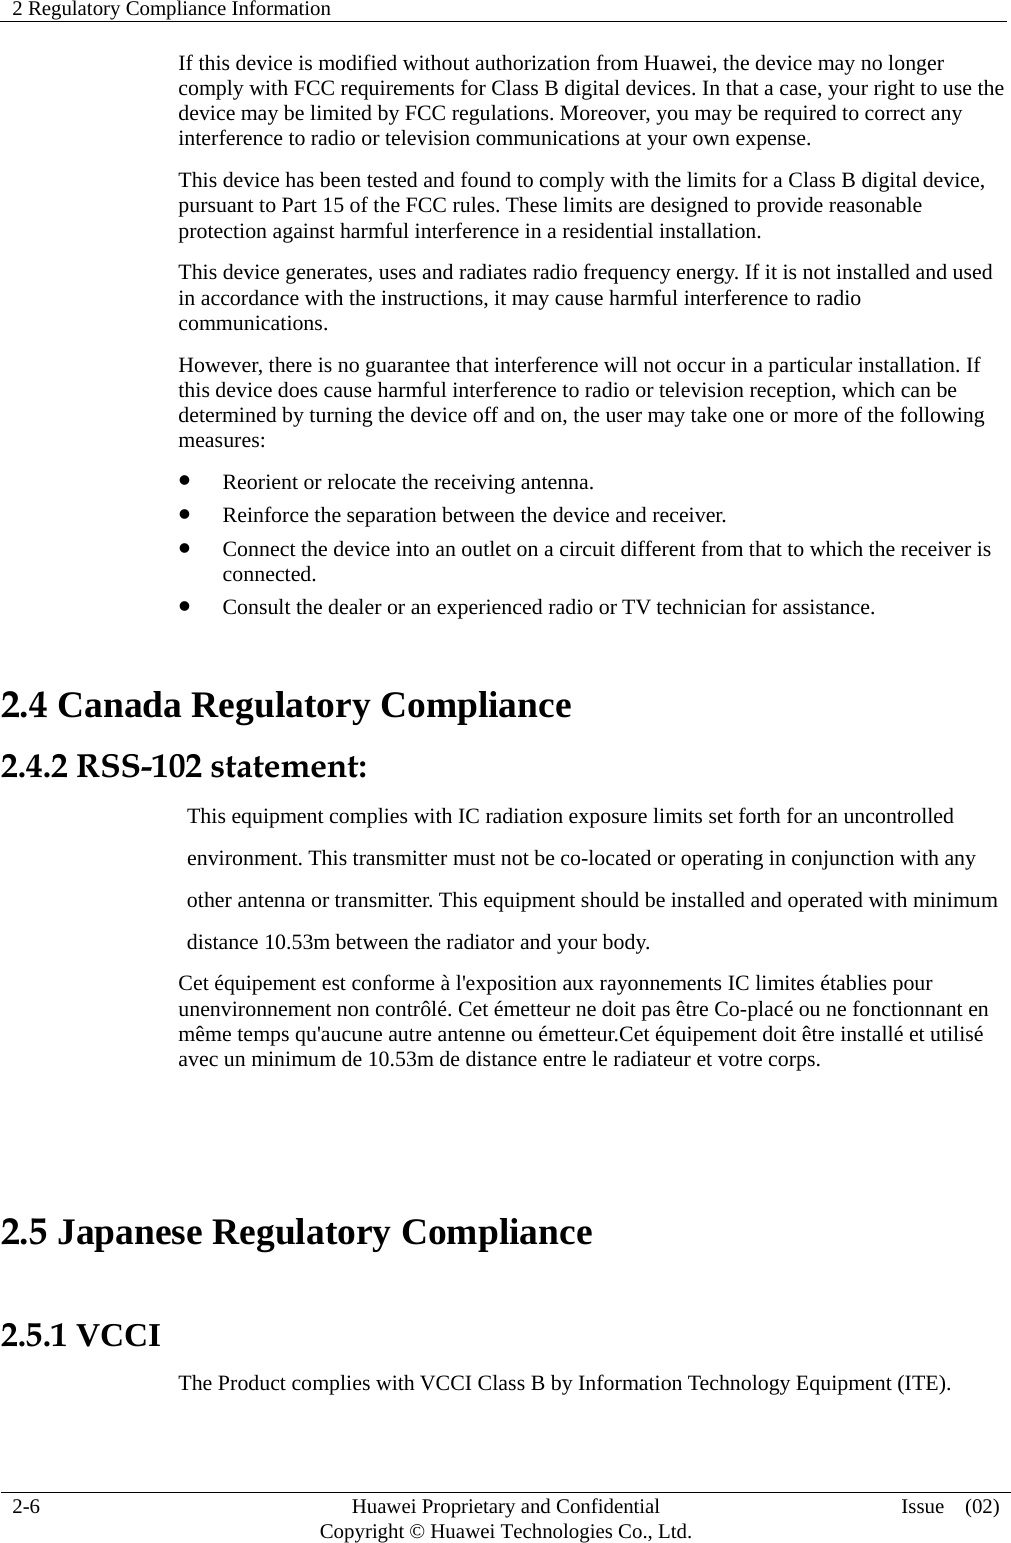 2 Regulatory Compliance Information     2-6  Huawei Proprietary and Confidential         Copyright © Huawei Technologies Co., Ltd.  Issue  (02)  If this device is modified without authorization from Huawei, the device may no longer comply with FCC requirements for Class B digital devices. In that a case, your right to use the device may be limited by FCC regulations. Moreover, you may be required to correct any interference to radio or television communications at your own expense. This device has been tested and found to comply with the limits for a Class B digital device, pursuant to Part 15 of the FCC rules. These limits are designed to provide reasonable protection against harmful interference in a residential installation. This device generates, uses and radiates radio frequency energy. If it is not installed and used in accordance with the instructions, it may cause harmful interference to radio communications. However, there is no guarantee that interference will not occur in a particular installation. If this device does cause harmful interference to radio or television reception, which can be determined by turning the device off and on, the user may take one or more of the following measures:  Reorient or relocate the receiving antenna.  Reinforce the separation between the device and receiver.  Connect the device into an outlet on a circuit different from that to which the receiver is connected.  Consult the dealer or an experienced radio or TV technician for assistance. 2.4 Canada Regulatory Compliance 2.4.2 RSS-102 statement:                  This equipment complies with IC radiation exposure limits set forth for an uncontrolled                                 environment. This transmitter must not be co-located or operating in conjunction with any                    other antenna or transmitter. This equipment should be installed and operated with minimum                   distance 10.53m between the radiator and your body. Cet équipement est conforme à l&apos;exposition aux rayonnements IC limites établies pour unenvironnement non contrôlé. Cet émetteur ne doit pas être Co-placé ou ne fonctionnant en même temps qu&apos;aucune autre antenne ou émetteur.Cet équipement doit être installé et utilisé avec un minimum de 10.53m de distance entre le radiateur et votre corps.   2.5 Japanese Regulatory Compliance  2.5.1 VCCI The Product complies with VCCI Class B by Information Technology Equipment (ITE). 